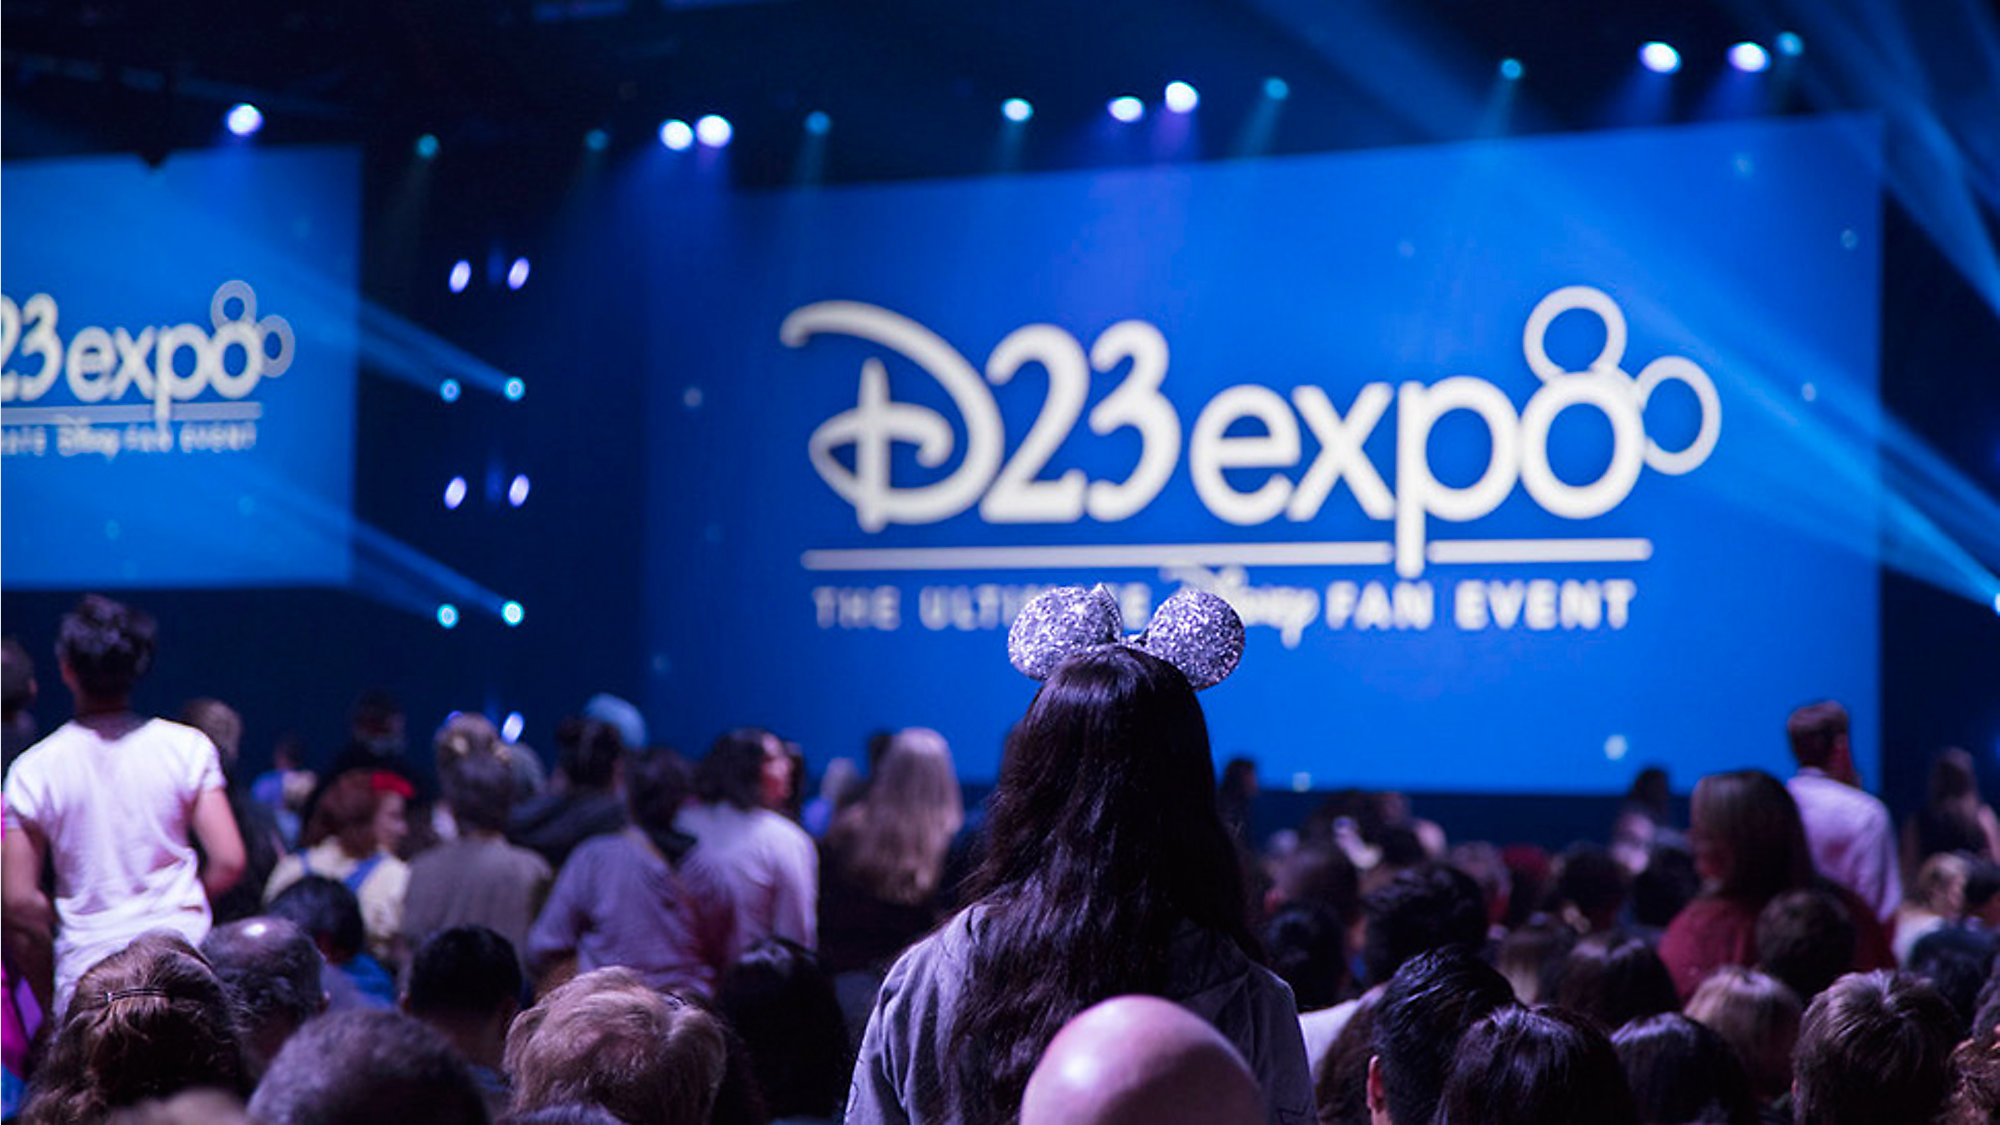 Disneyland announces new rides, lands and nighttime shows at D23 Expo in Anaheim